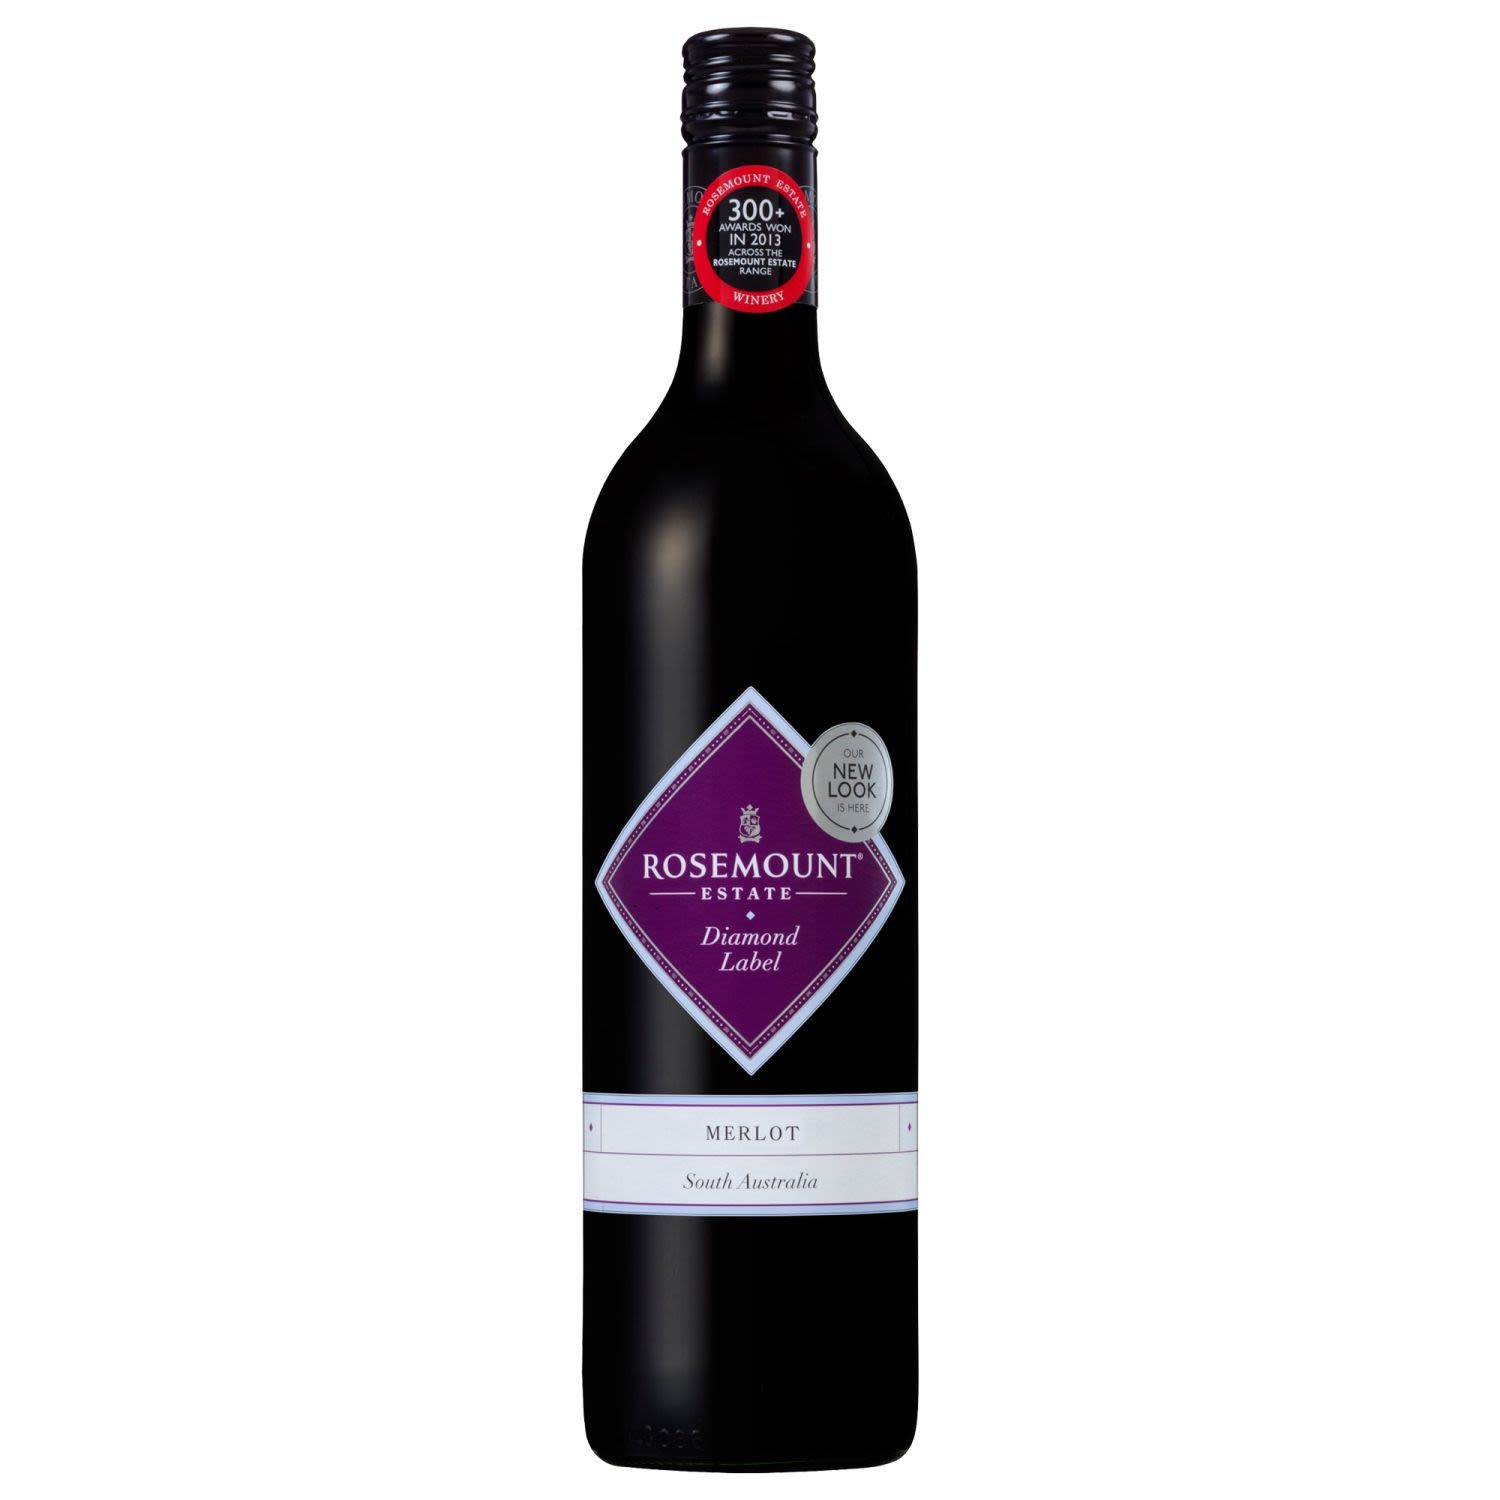 The nose shows aromas of plum, a touch of dried herbs, chocolate & dusty spice. Medium bodied with rich plum, spice, dark chocolate flavours, supported by soft, velvety tannins.<br /> <br />Alcohol Volume: 13.50%<br /><br />Pack Format: Bottle<br /><br />Standard Drinks: 8</br /><br />Pack Type: Bottle<br /><br />Country of Origin: Australia<br /><br />Region: South Eastern Australia<br /><br />Vintage: '2017<br />